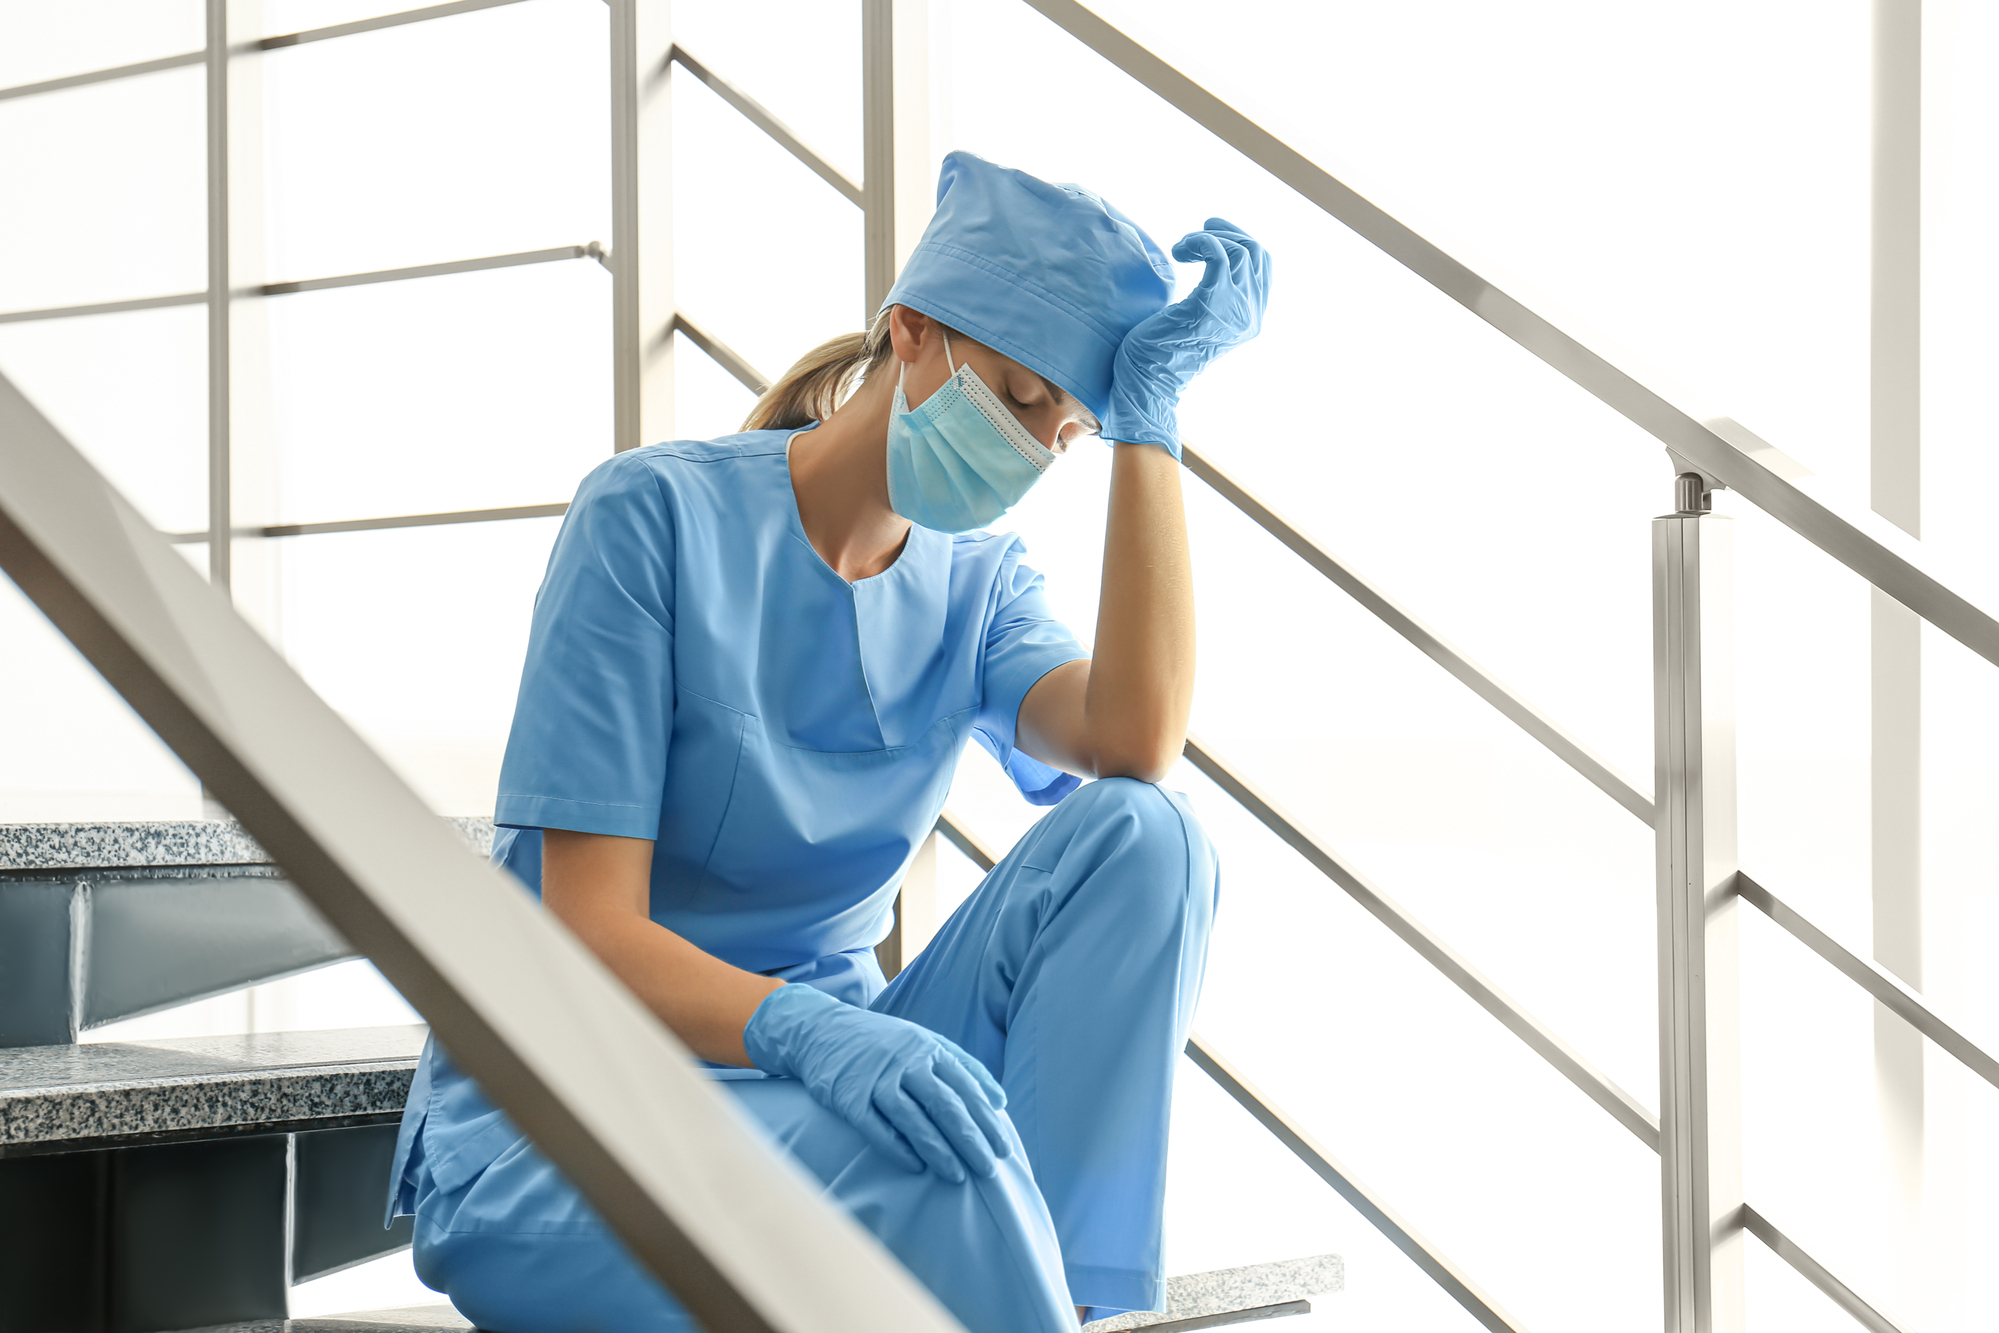 Hospital worker in scrubs stressed out